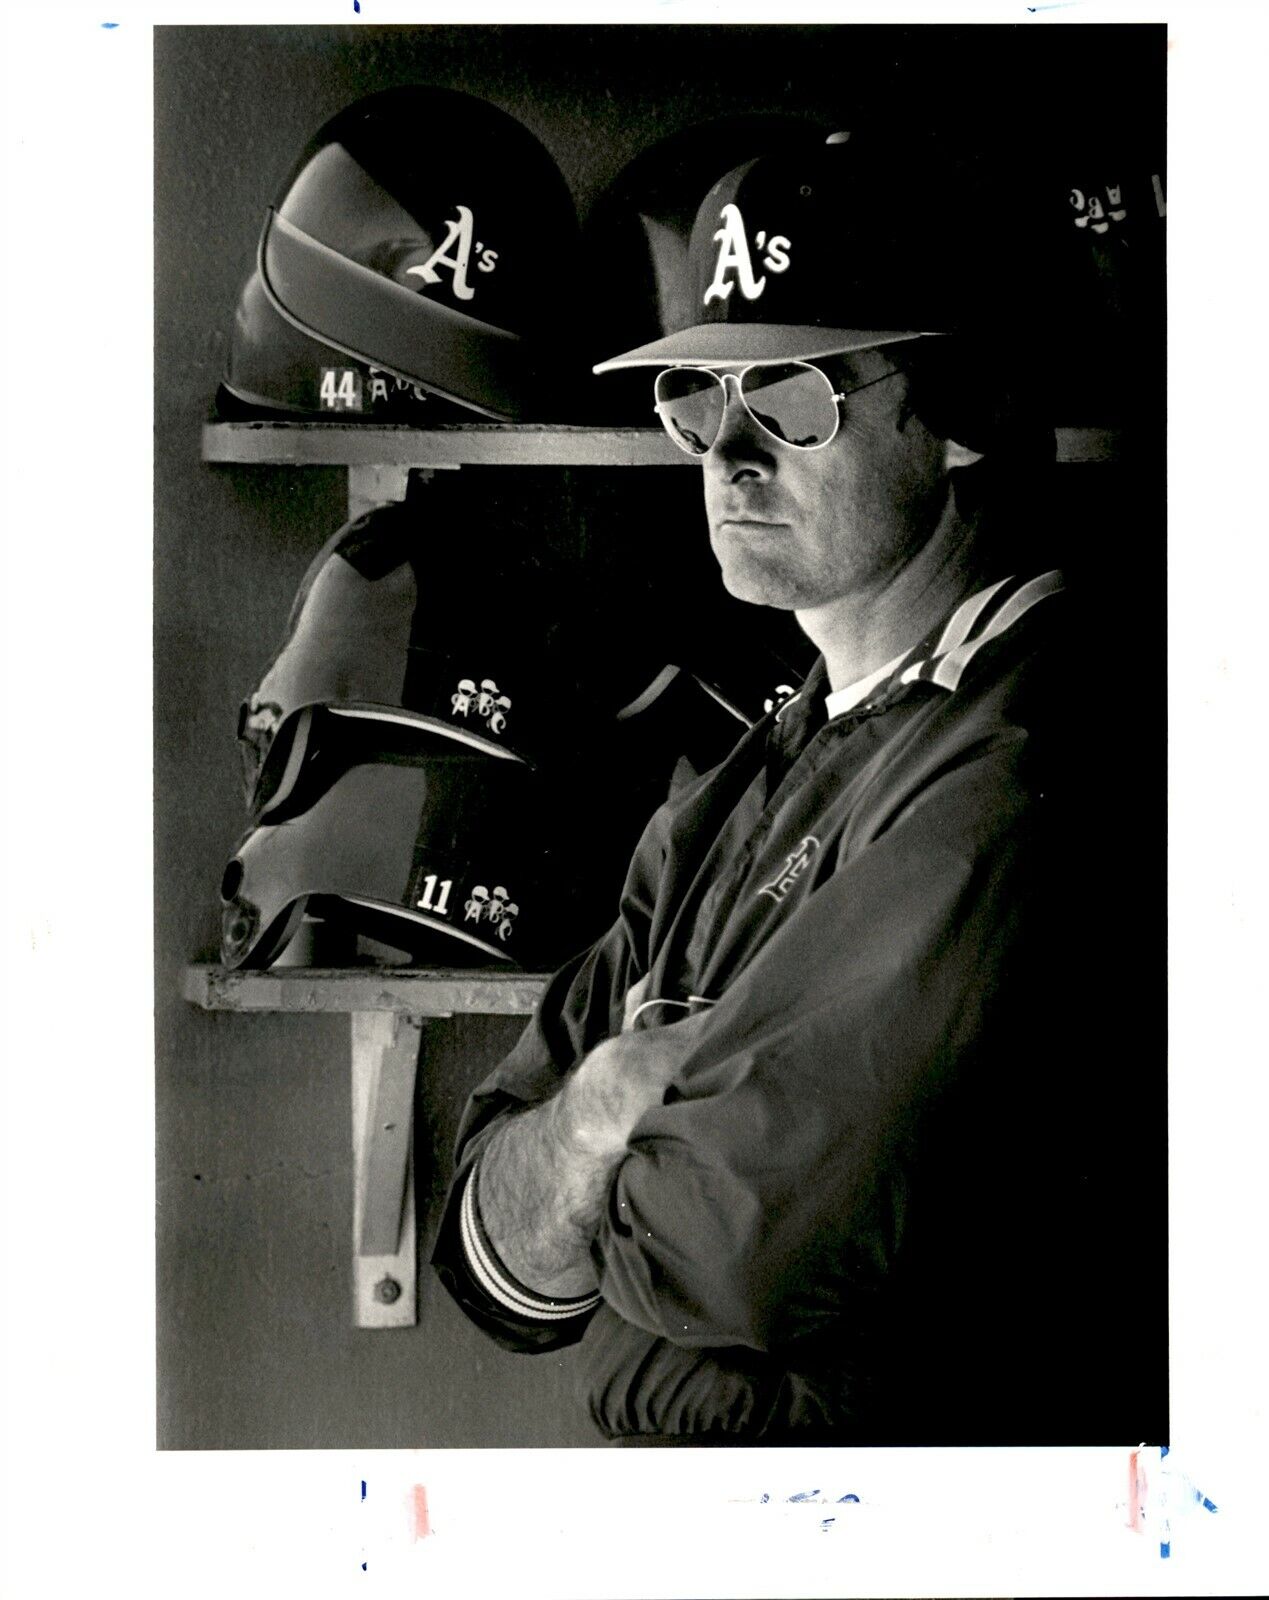 LG952 Original Photo TONY LARUSSA OAKLAND A'S MANAGER IN TEAM DUGOUT BASEBALL